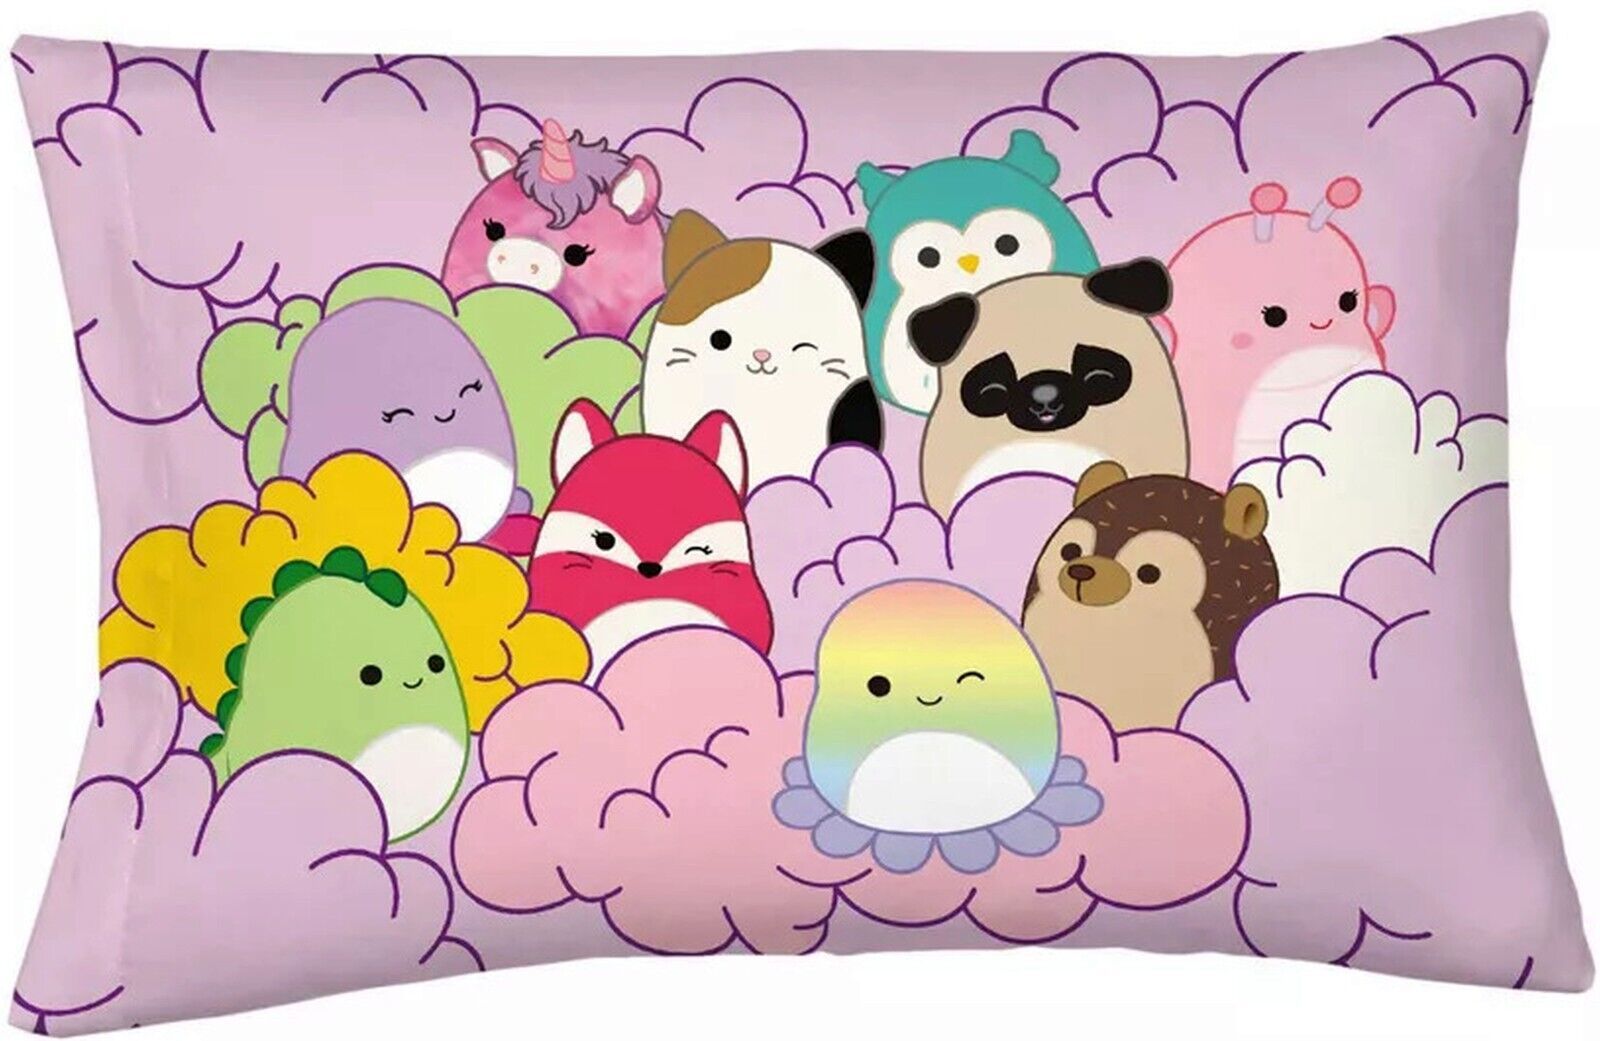 Primary image for Squishmallows Pillowcase measures 20 x 30 inches